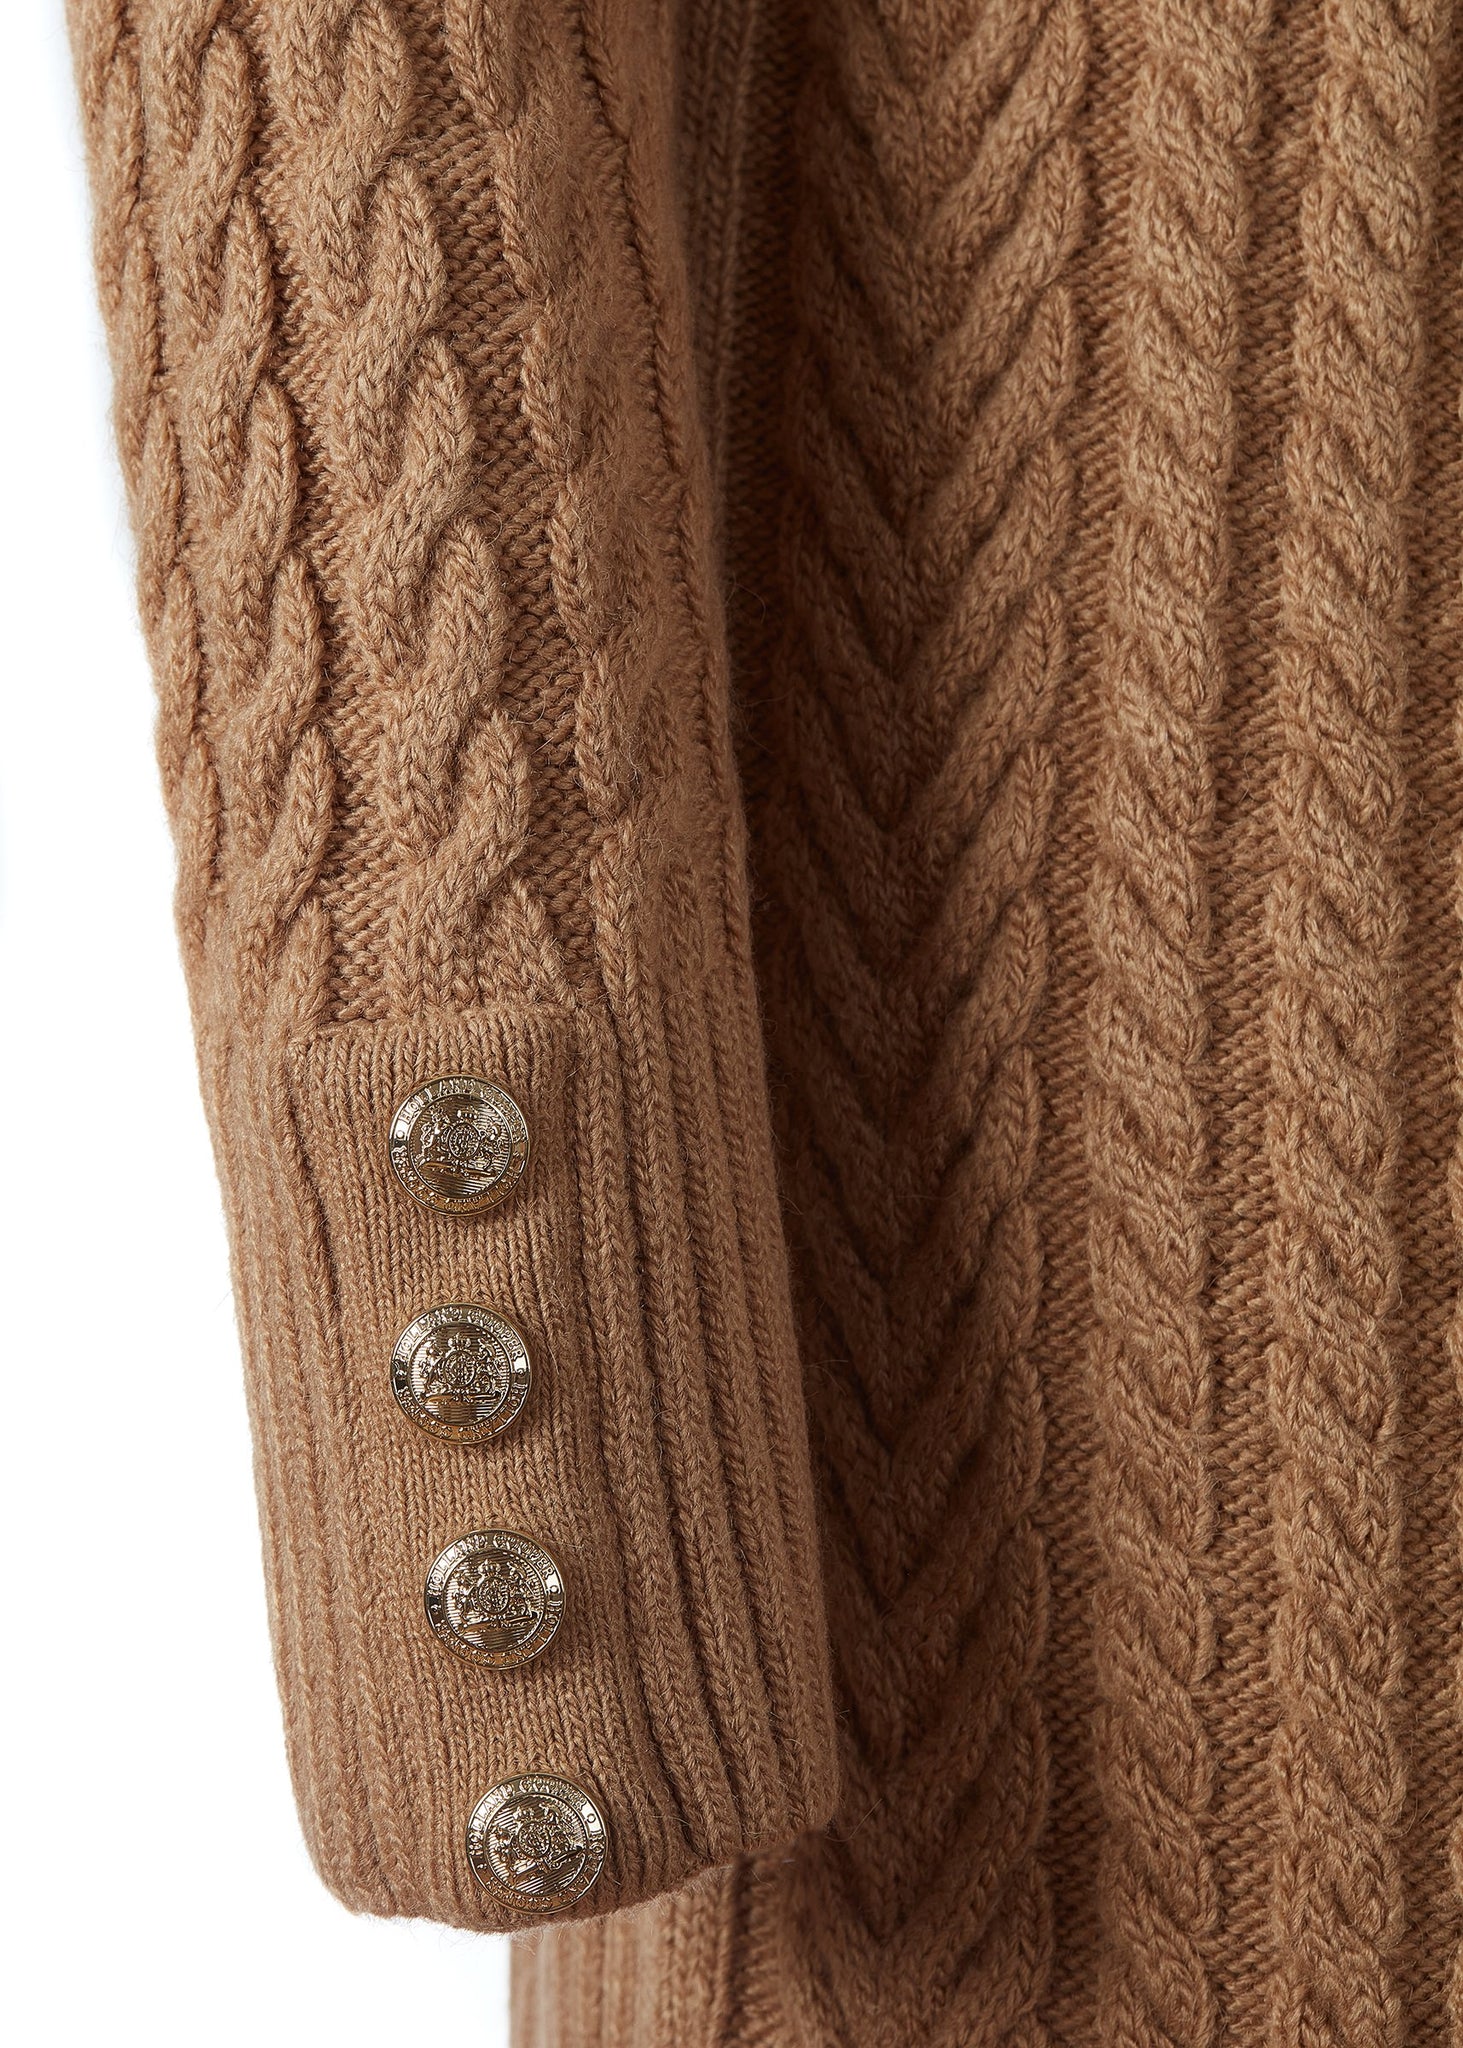 gold button details on cuffs of womens dark camel roll neck cable knit mini dress with ribbed cuffs and split ribbed hem